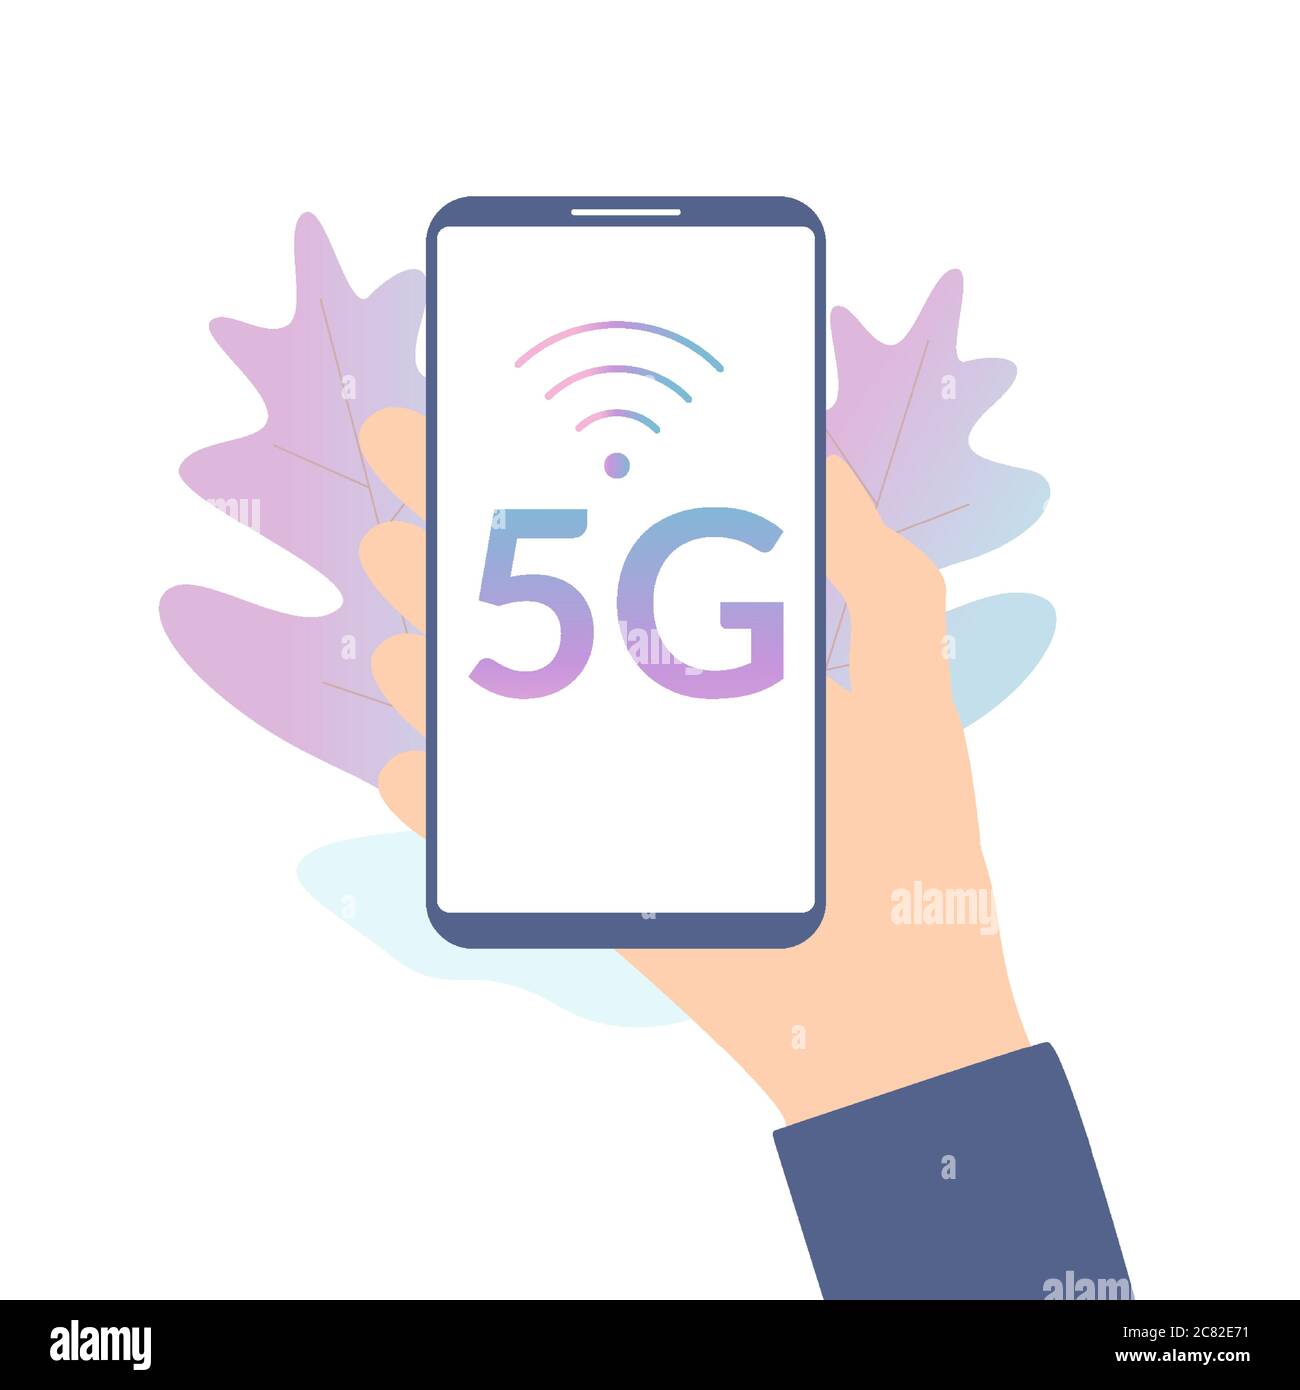 Hand holding smart phone with 5g wireless network technology symbol on the screen . Smartphone and 5G vector illustration isolated Stock Vector